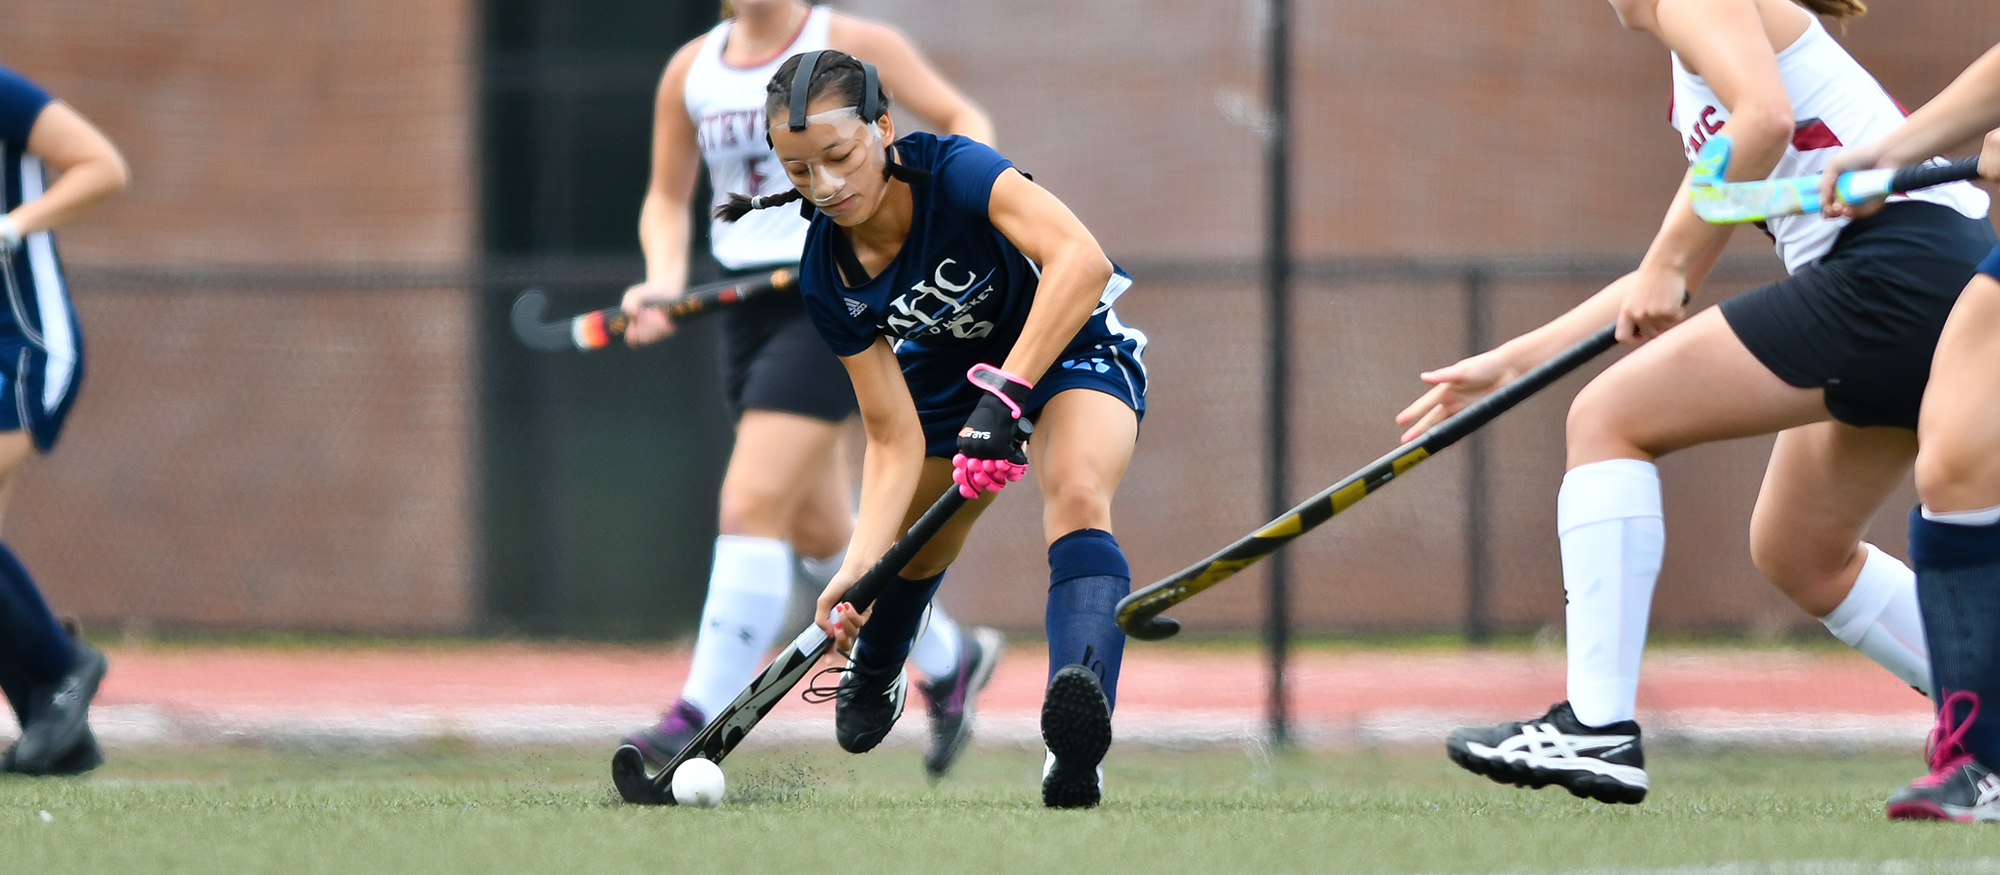 Wesleyan Slips Past Field Hockey, 5-2, in Non-Conference Play